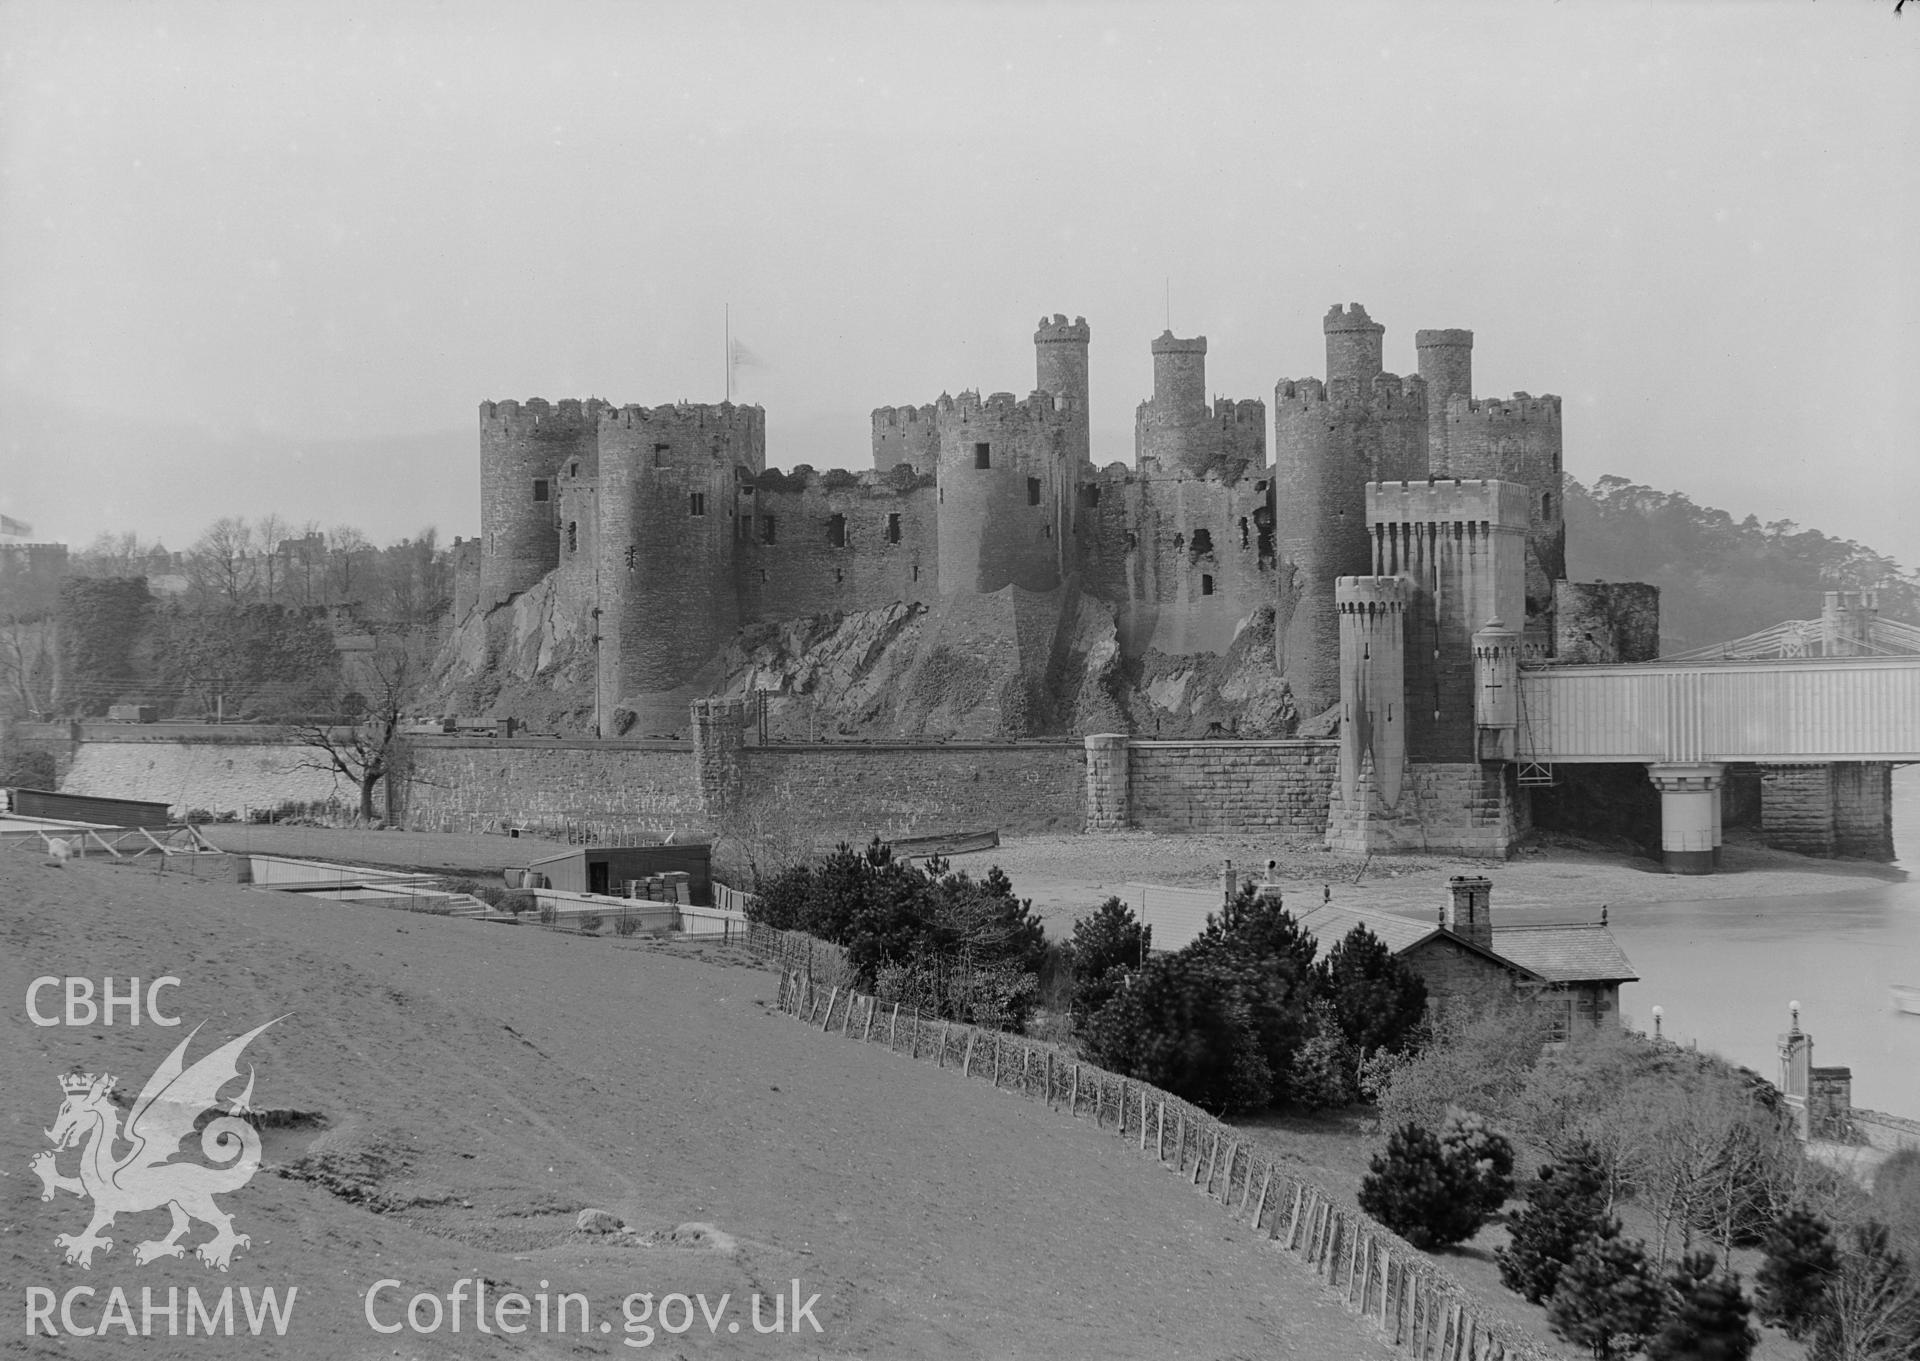 View of Conwy Castle from the southeast.